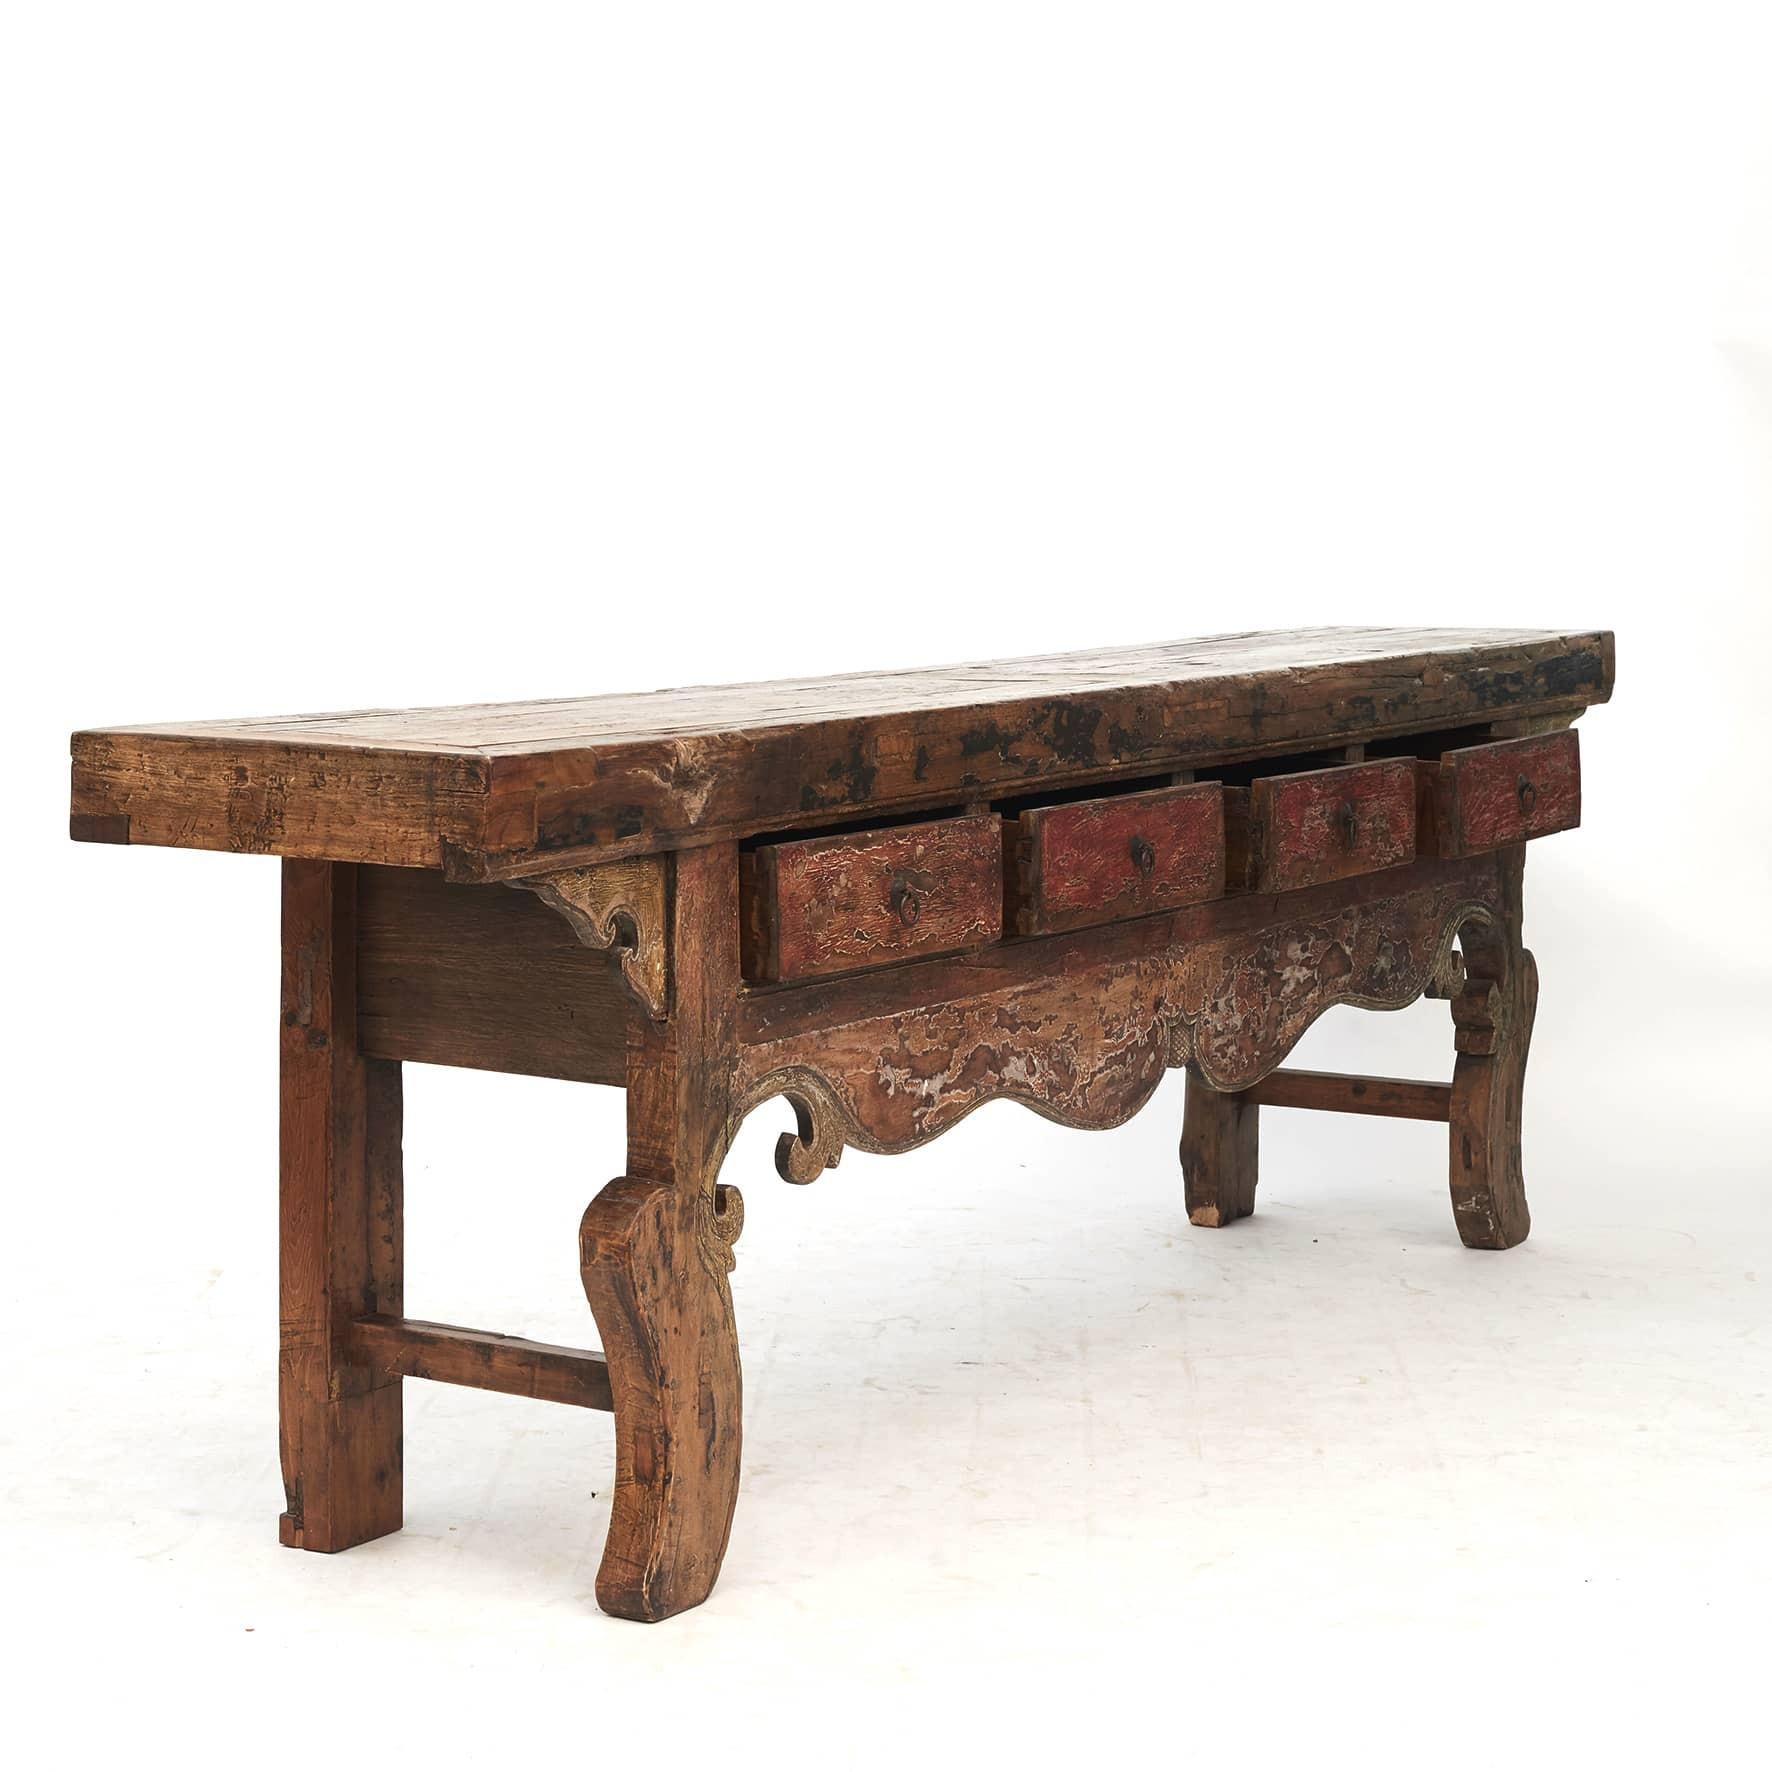 Large impressive console table / altar table from a monastery in Shanxi province, China, 1500-1600s.
Made of pine, with natural age-related patina, with remnants of red, black and yellow lacquer.
Original condition, but lovingly refurbished